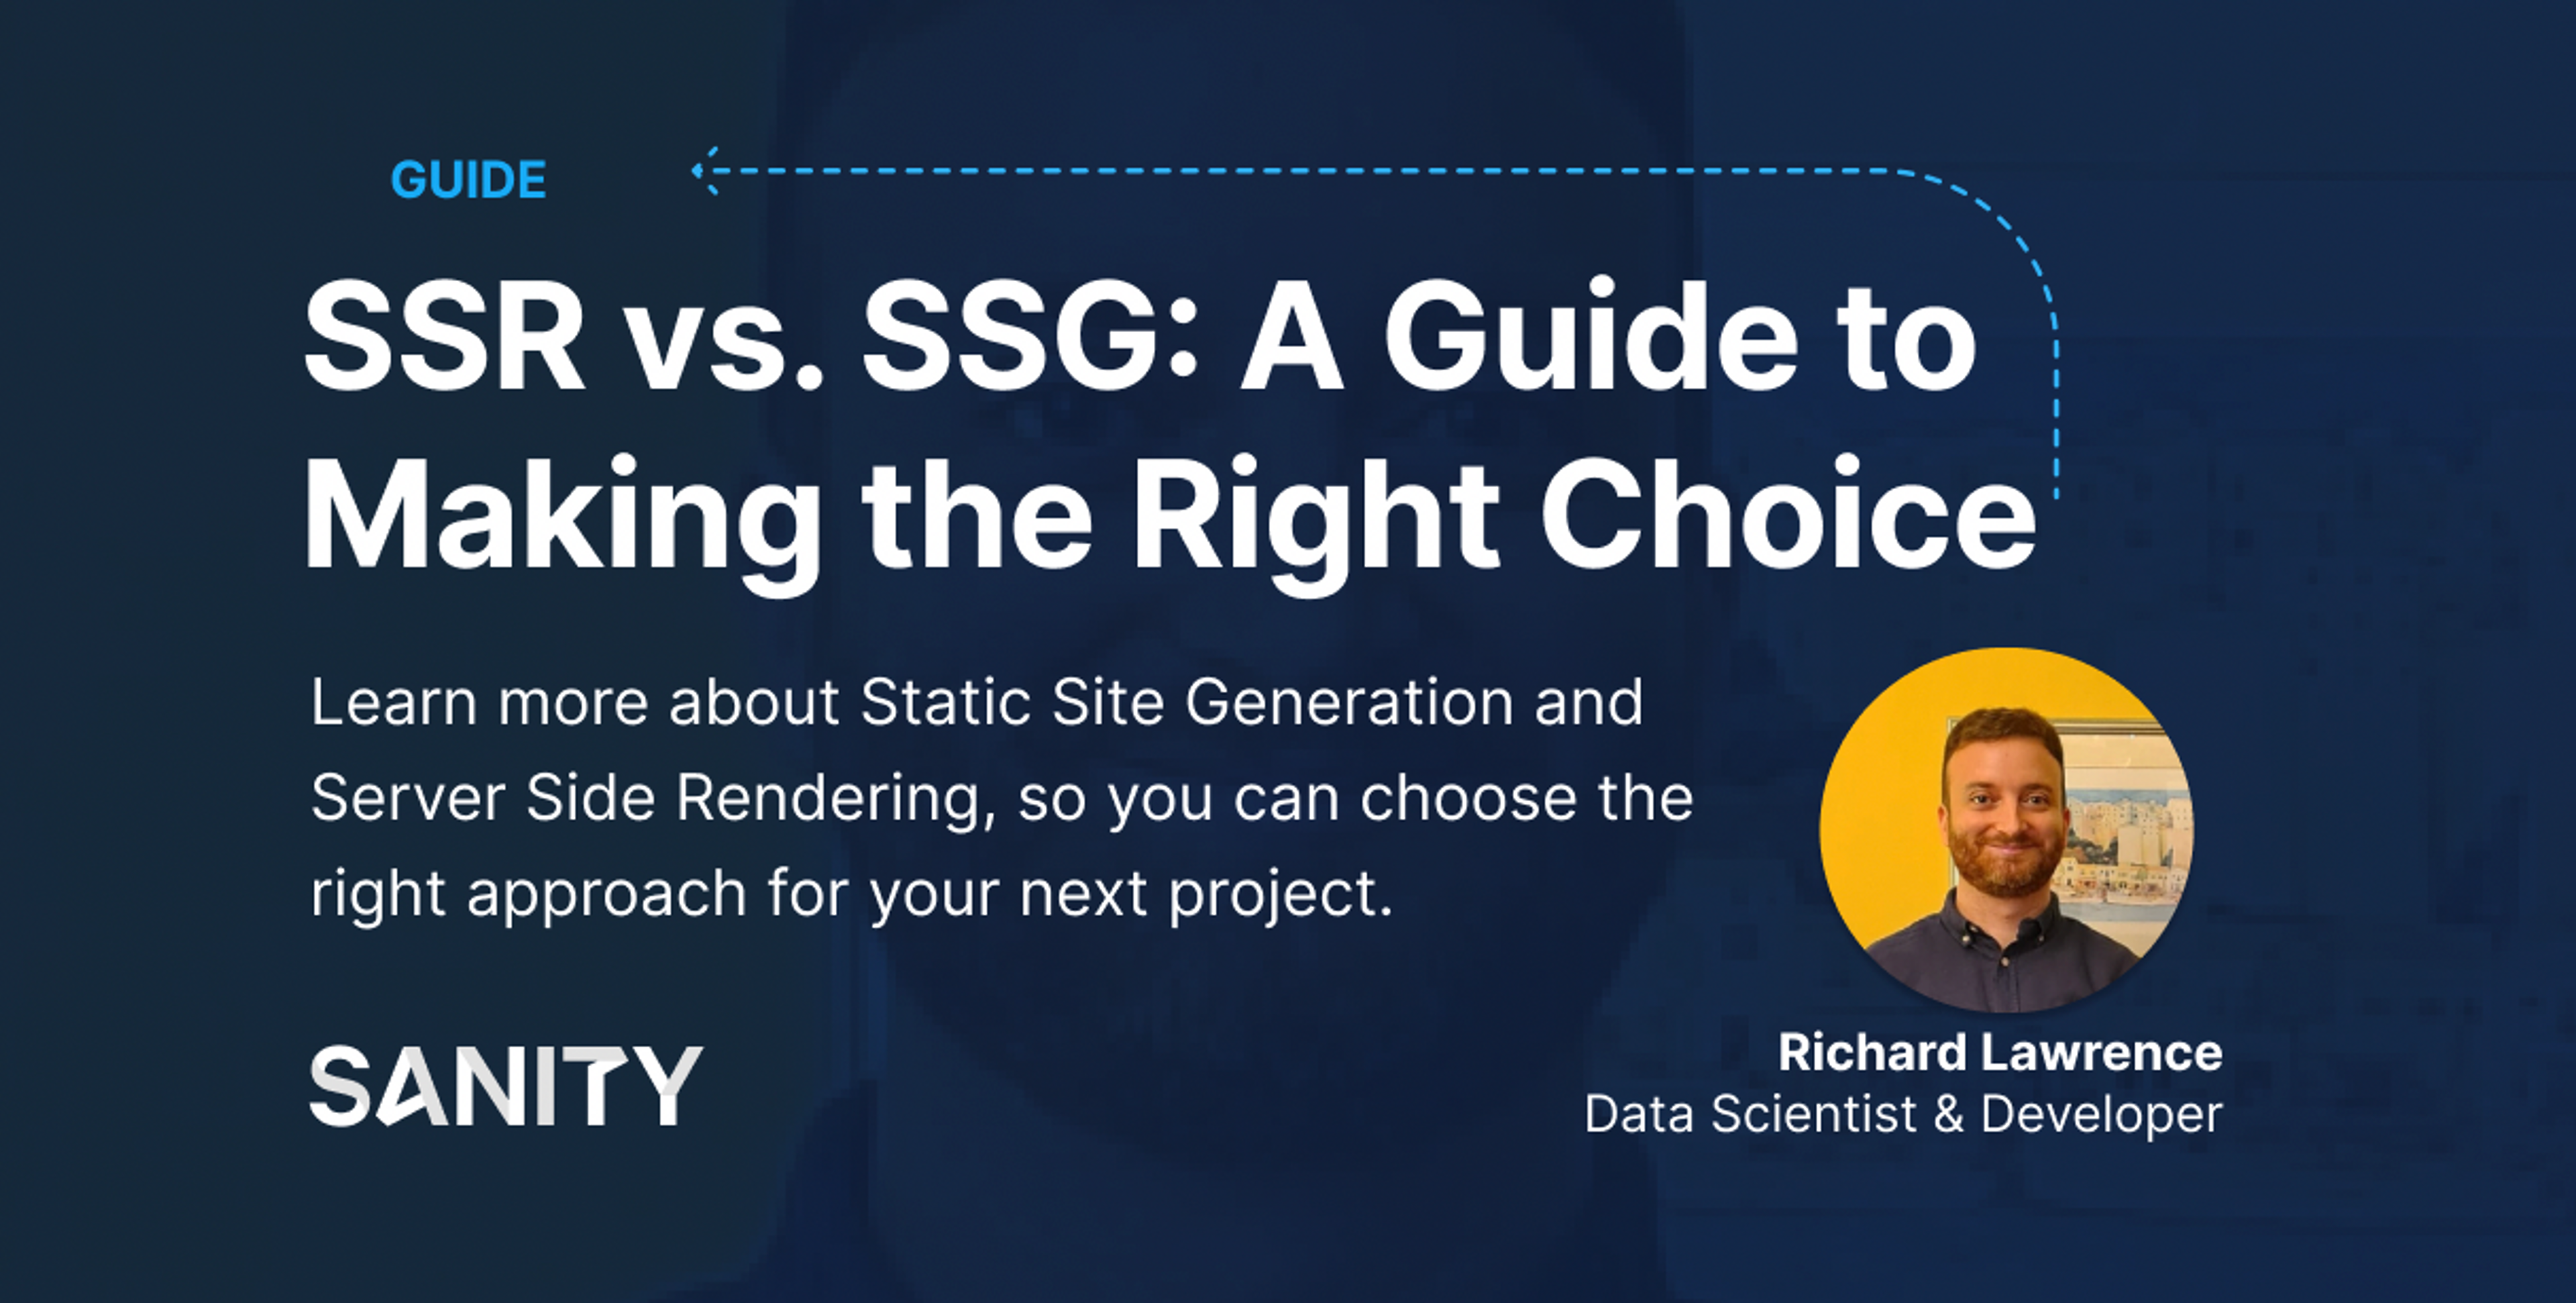 SSR vs. SSG: A guide to making the right choice for your applications